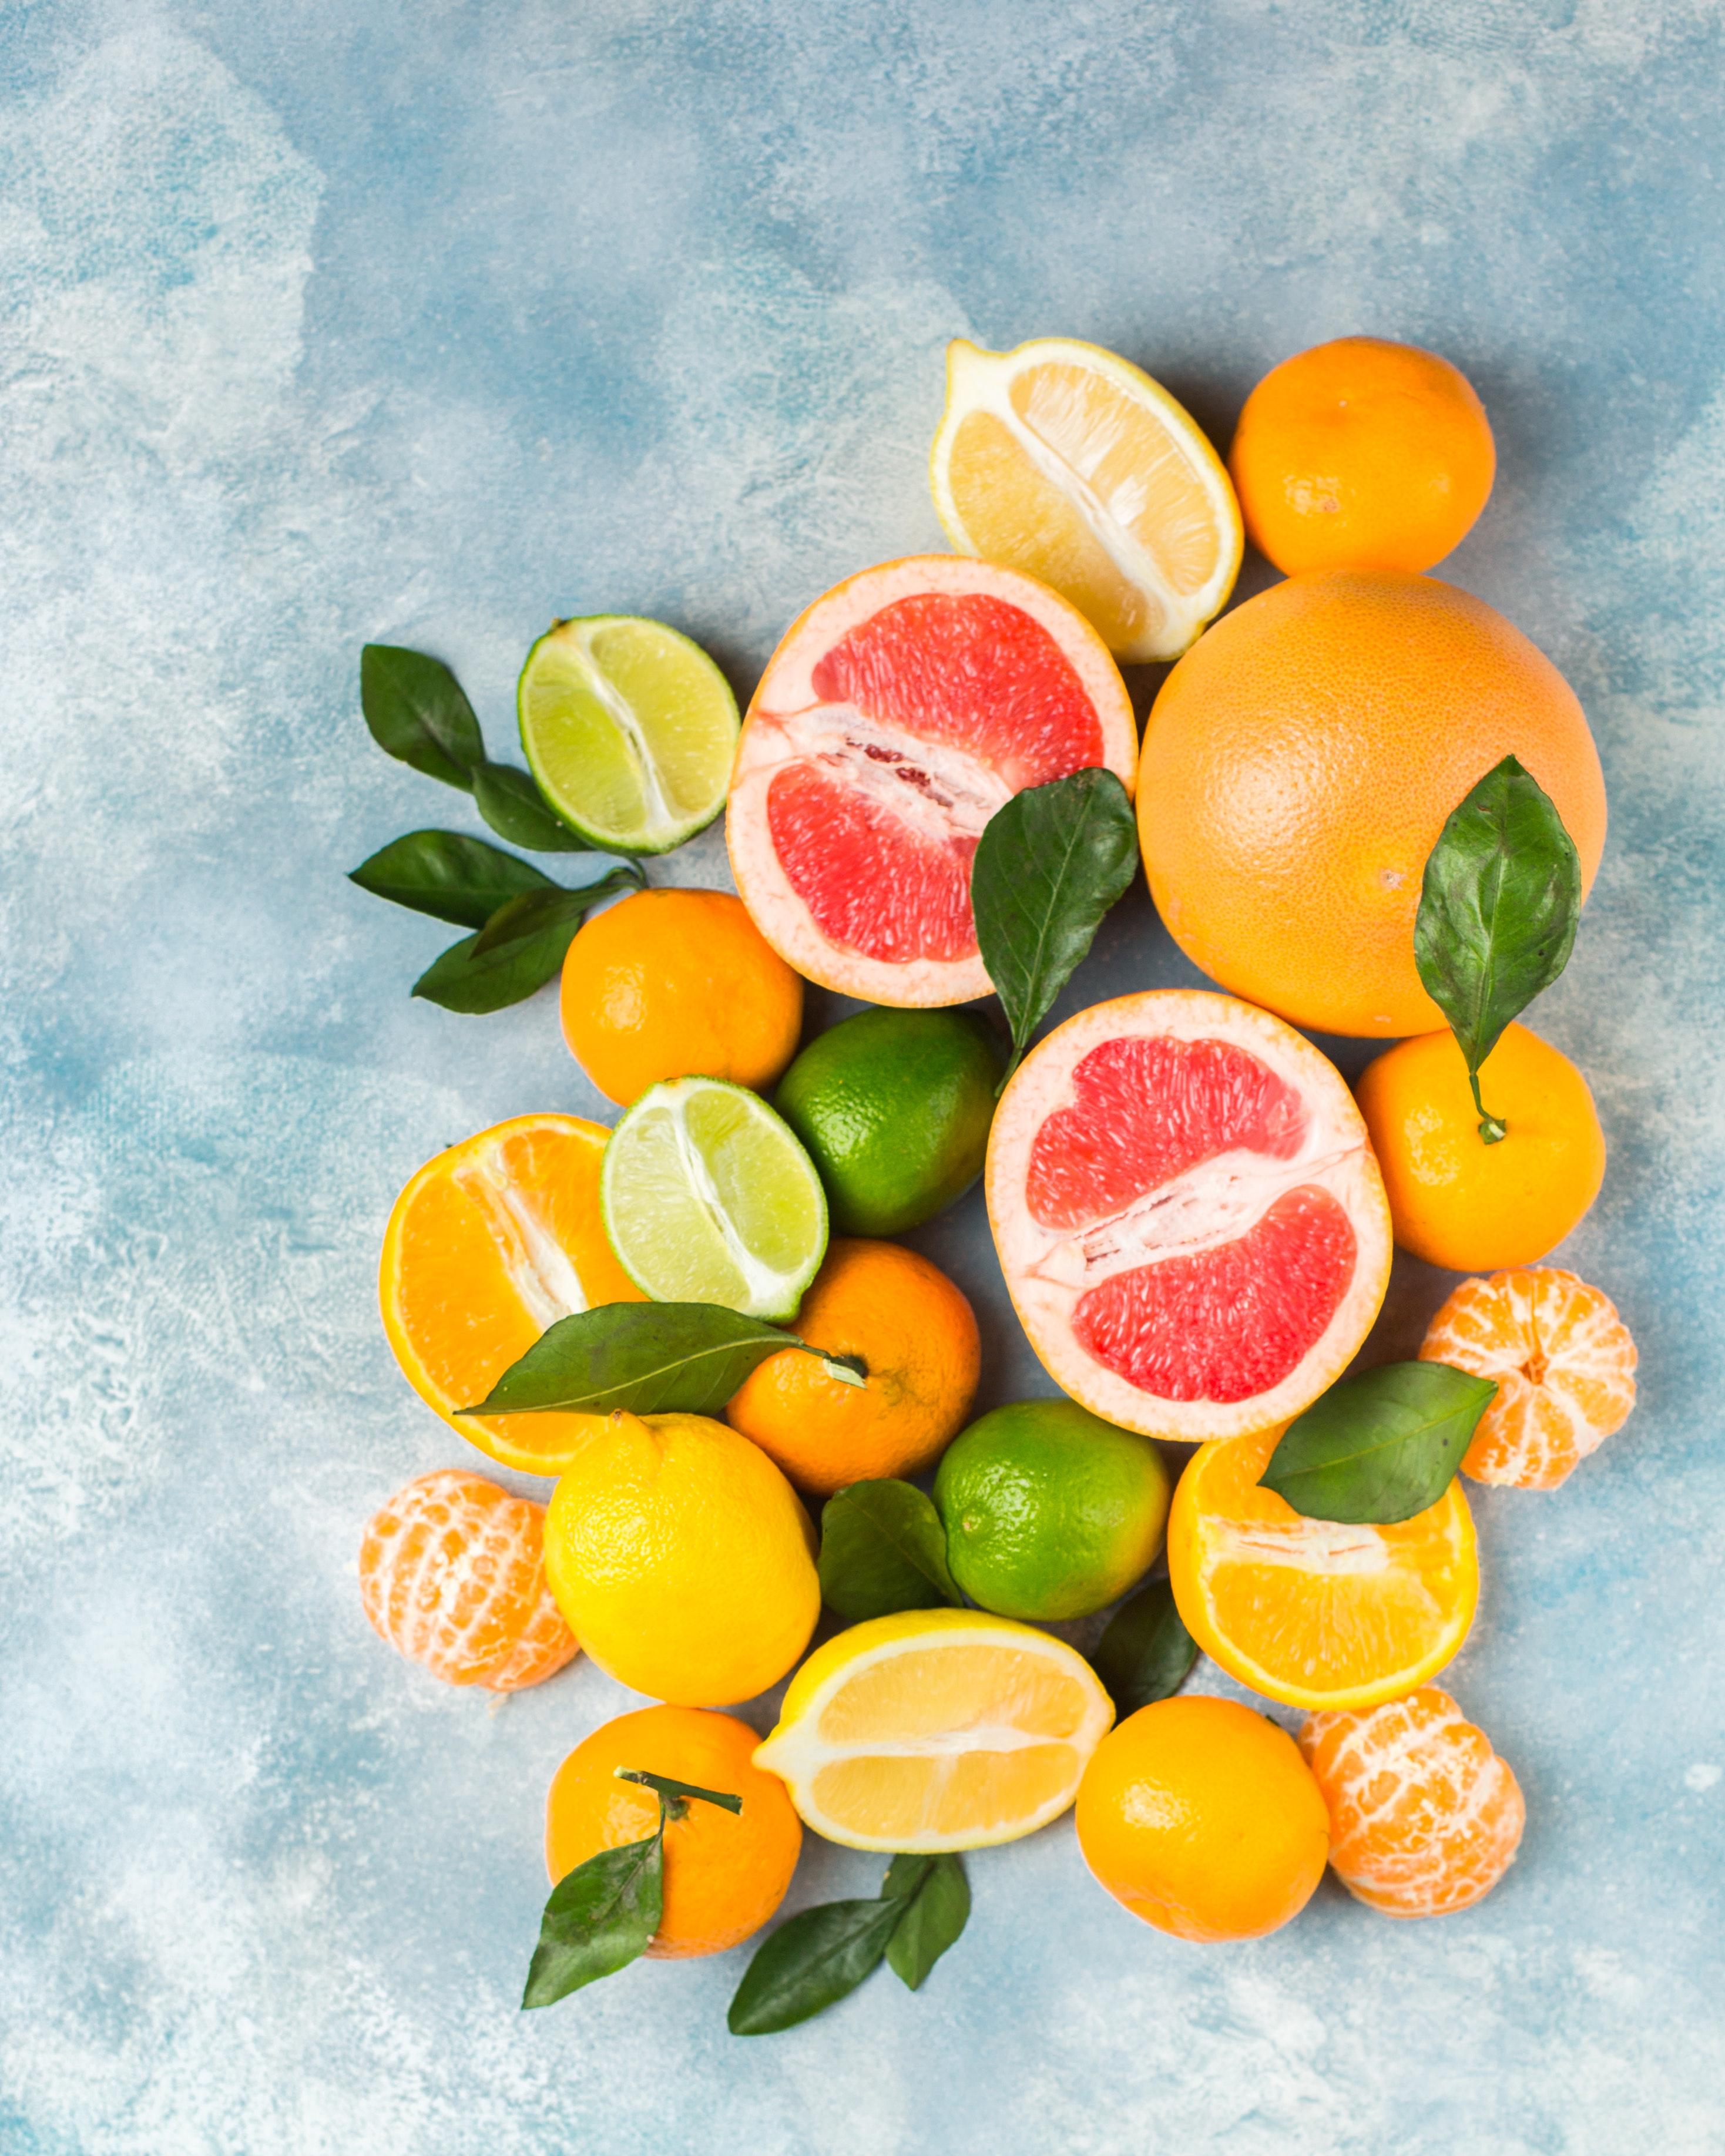 50 Citrus HD Wallpapers and Backgrounds